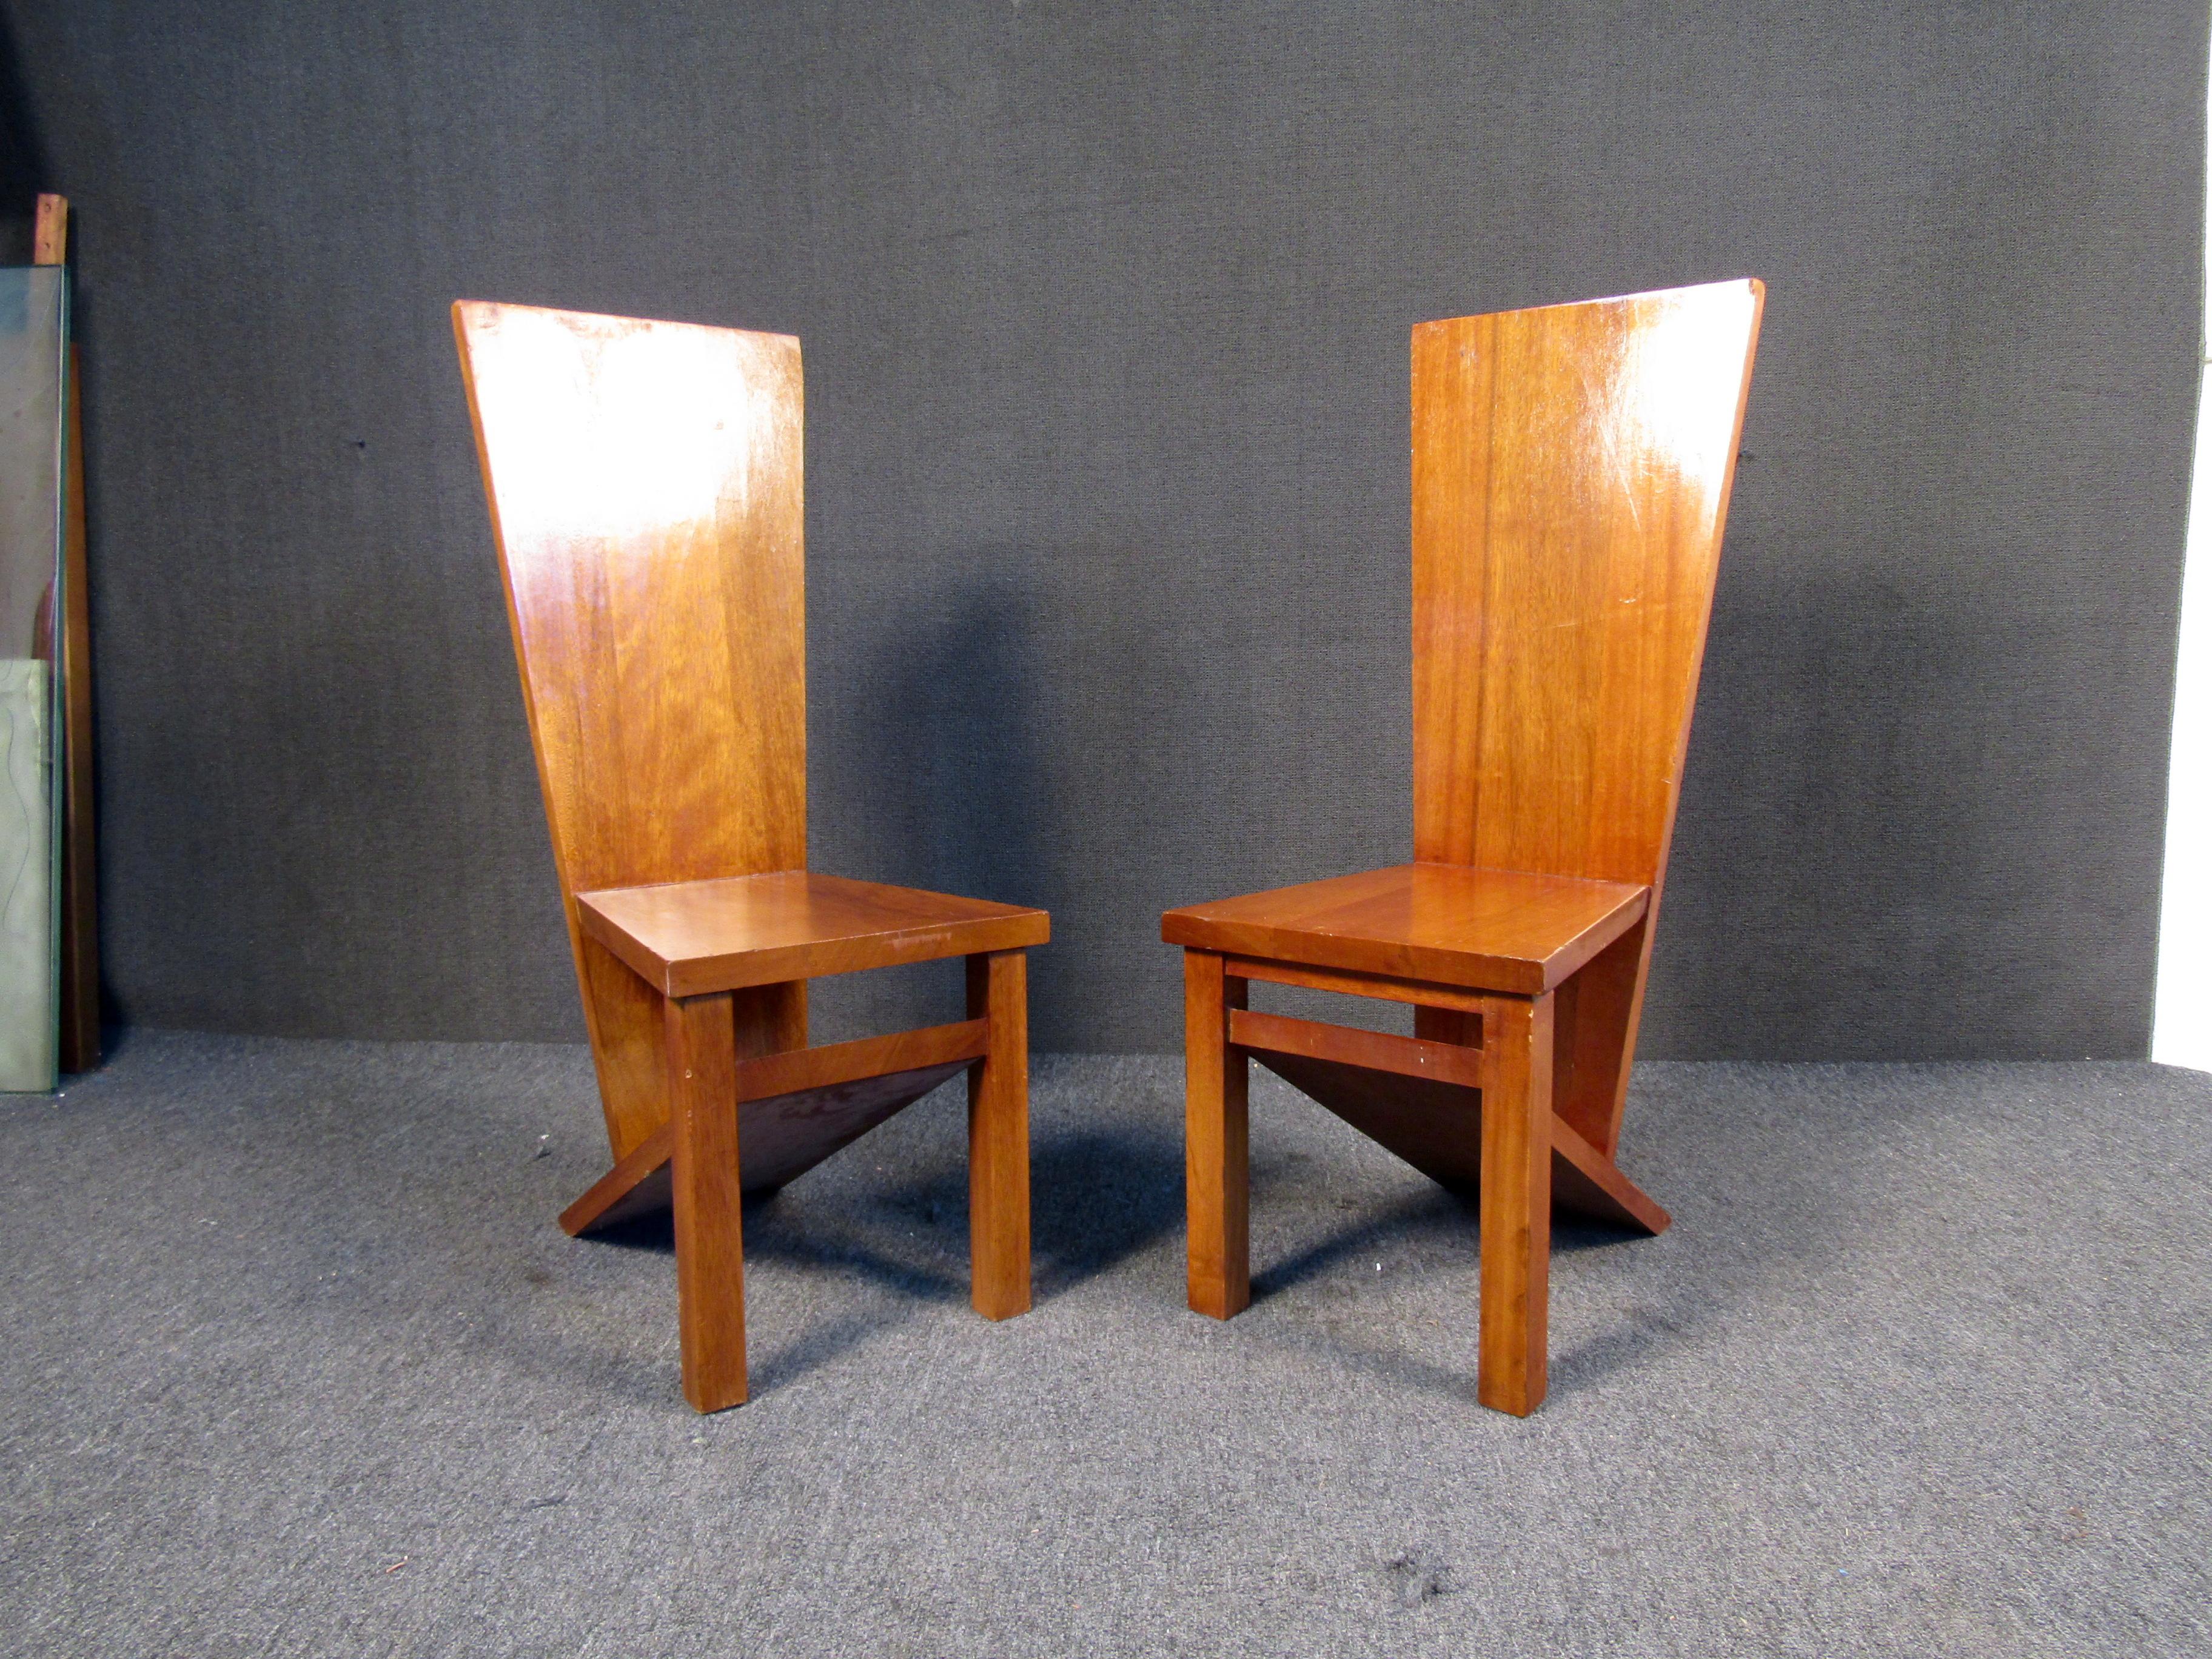 Pair of walnut finish wooden slab chairs sold as a set. Their monolithic form are sure to stand up to heavy daily use. A rustic, minimalist design borrows readily from the chairs of Gerrit Thomas Rietveld and Frank Lloyd Wright. A fine example of